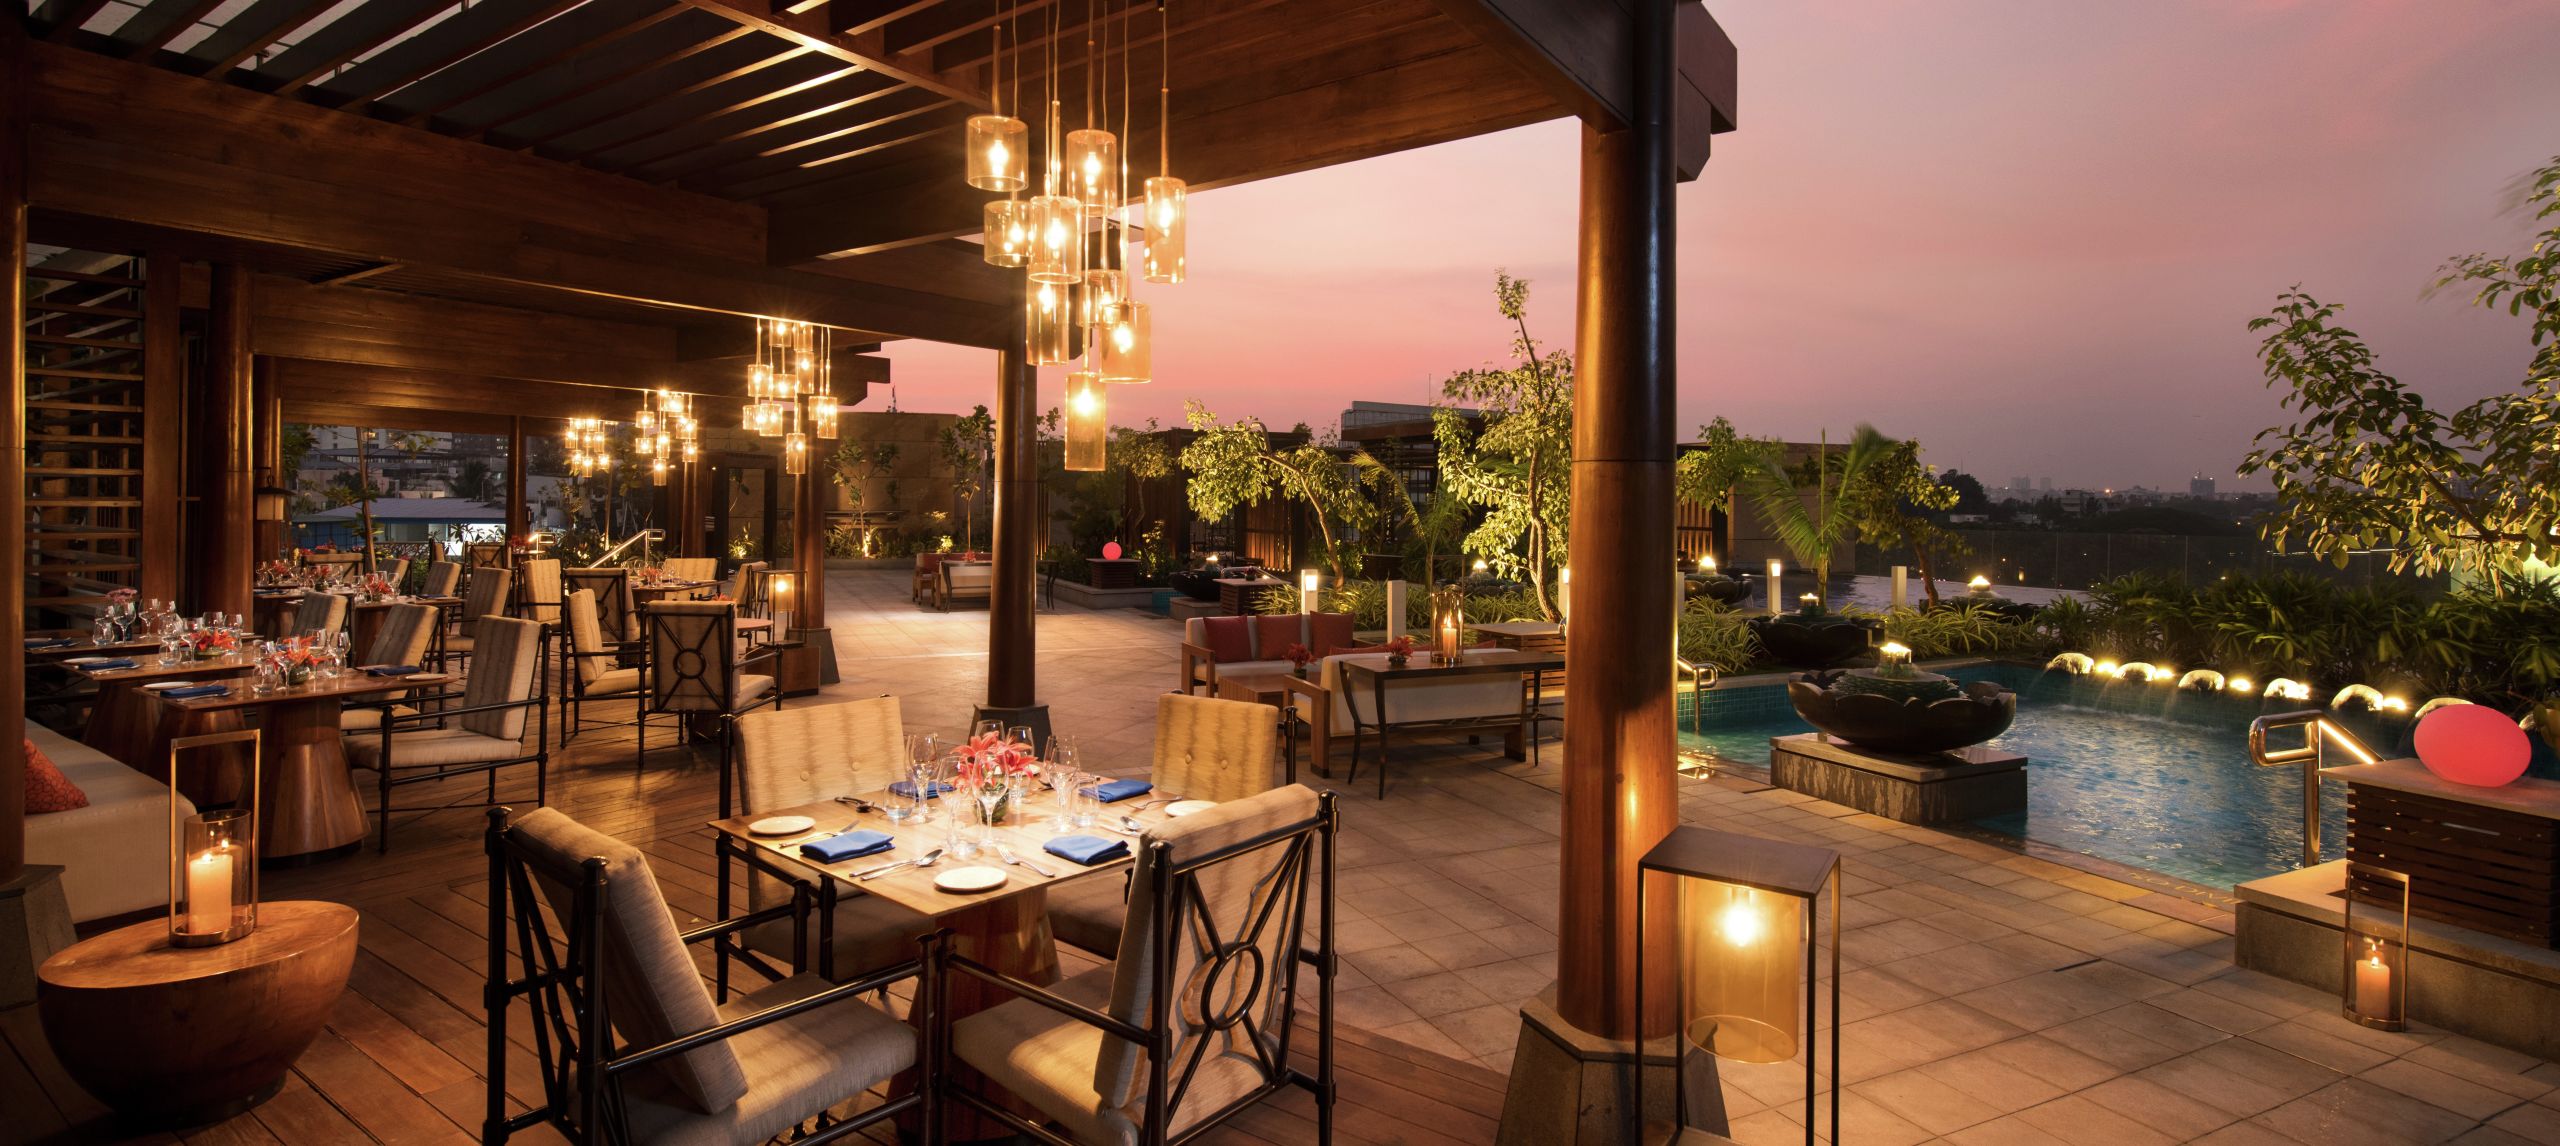 Outdoor Patio Dining Area at Dusk